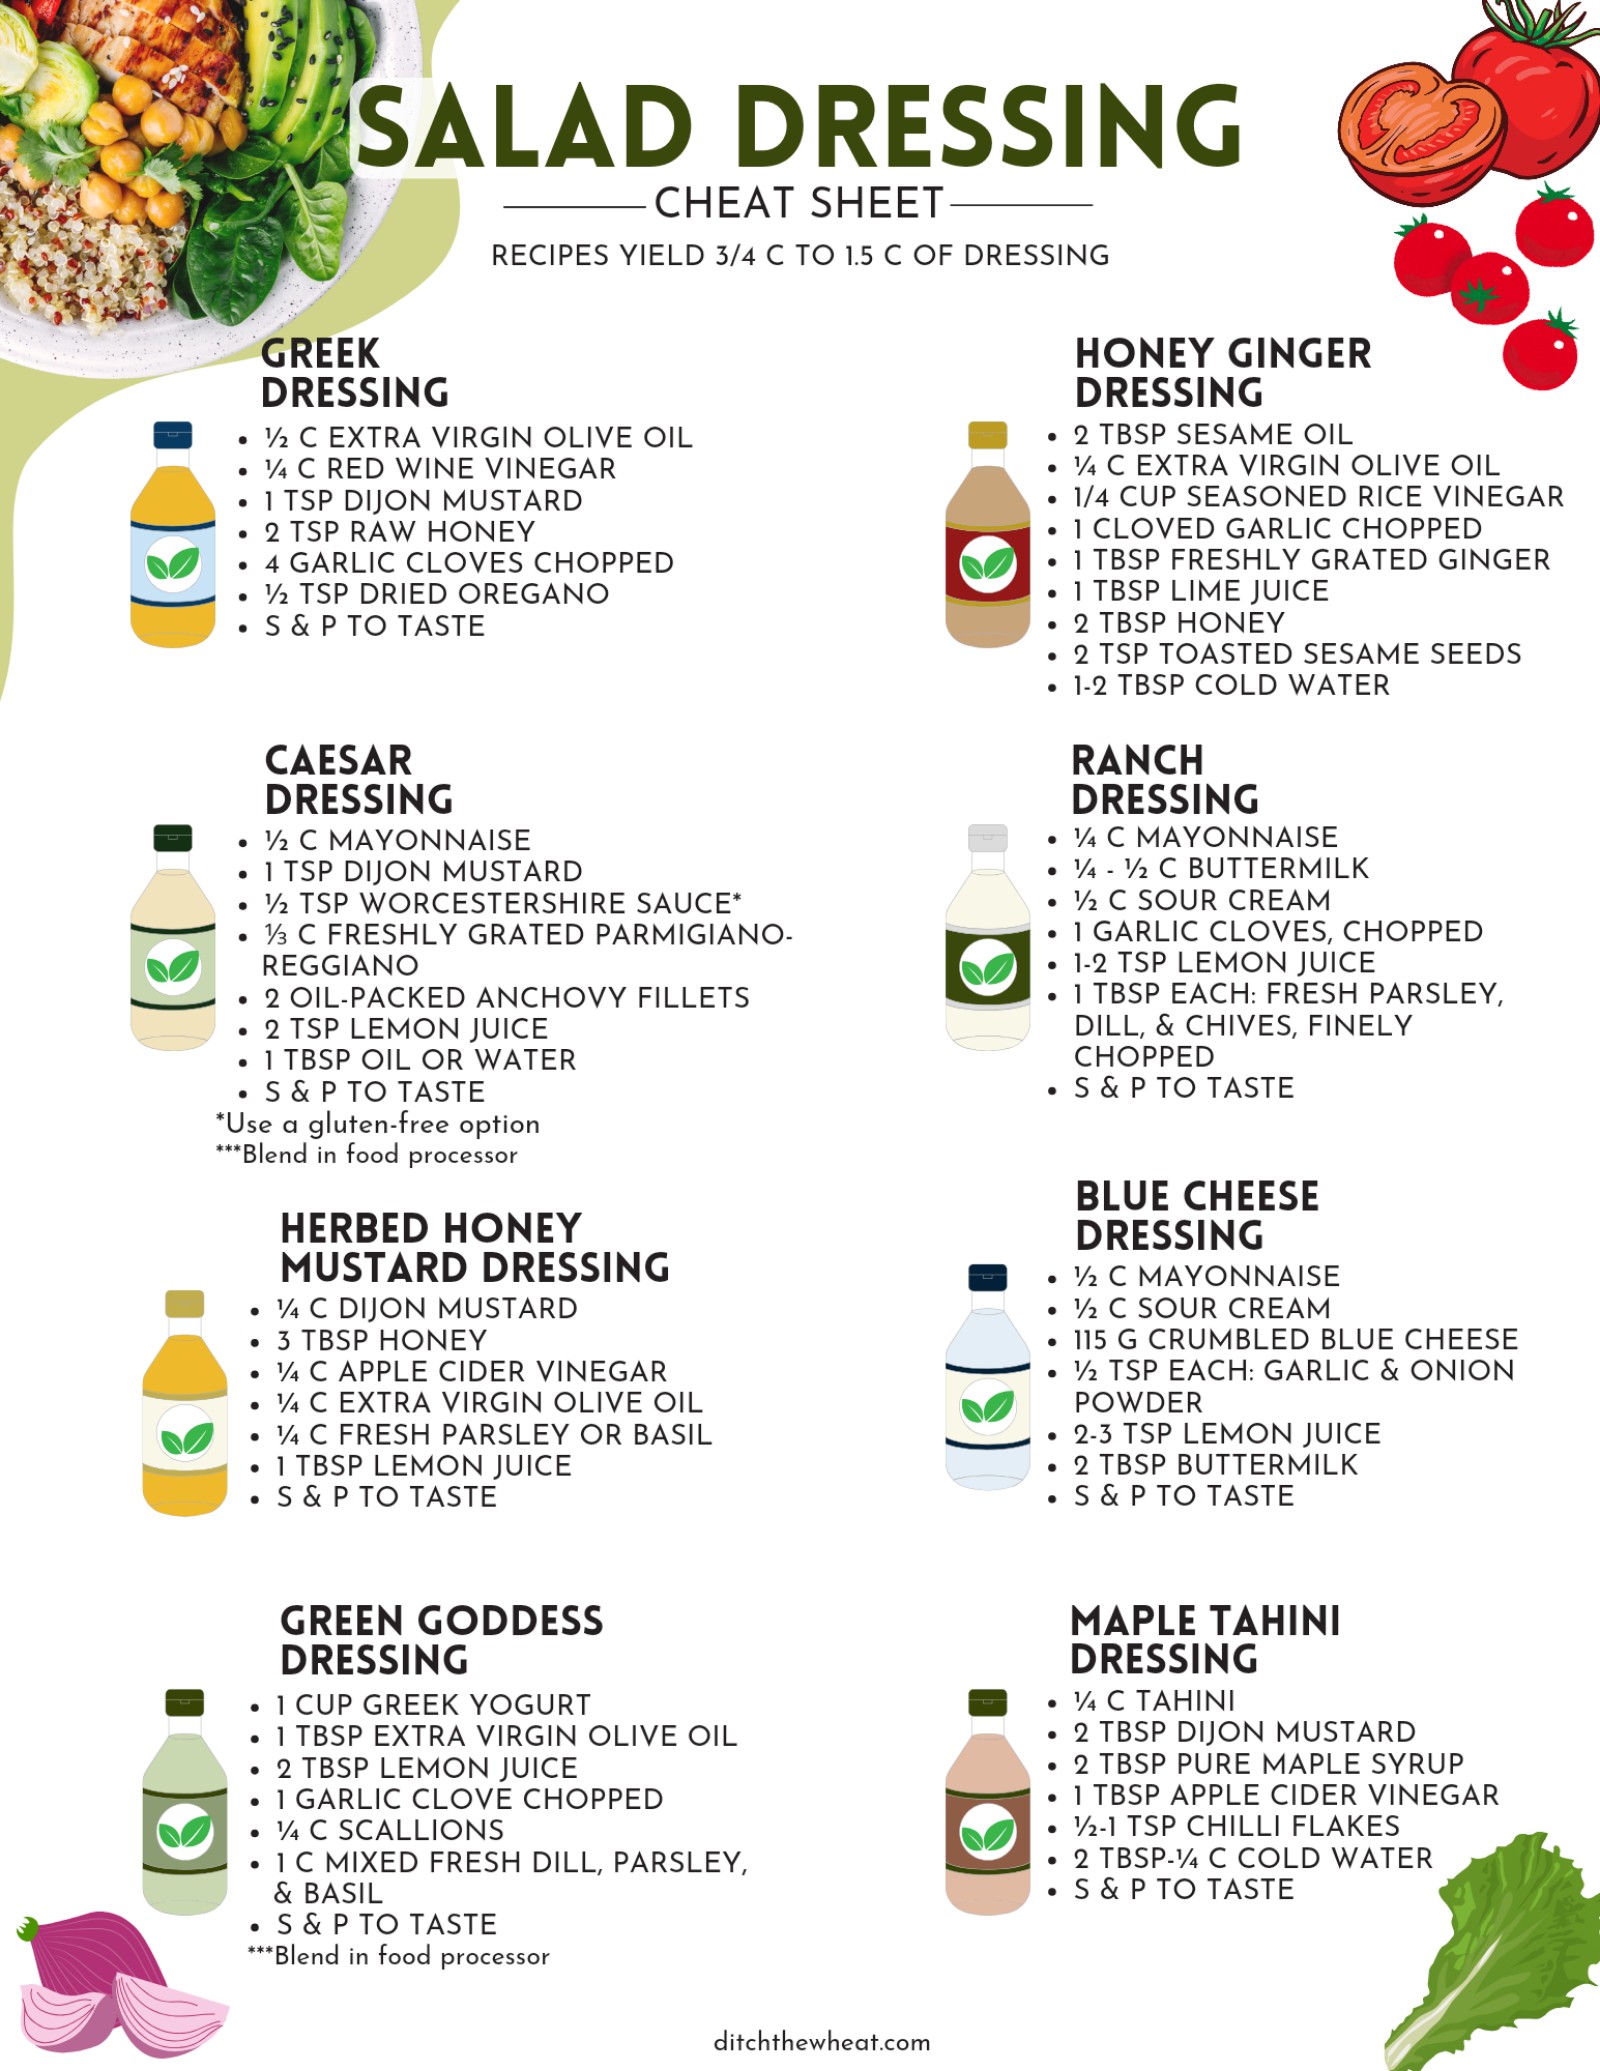 A printable with 8 different salad dressing recipes.